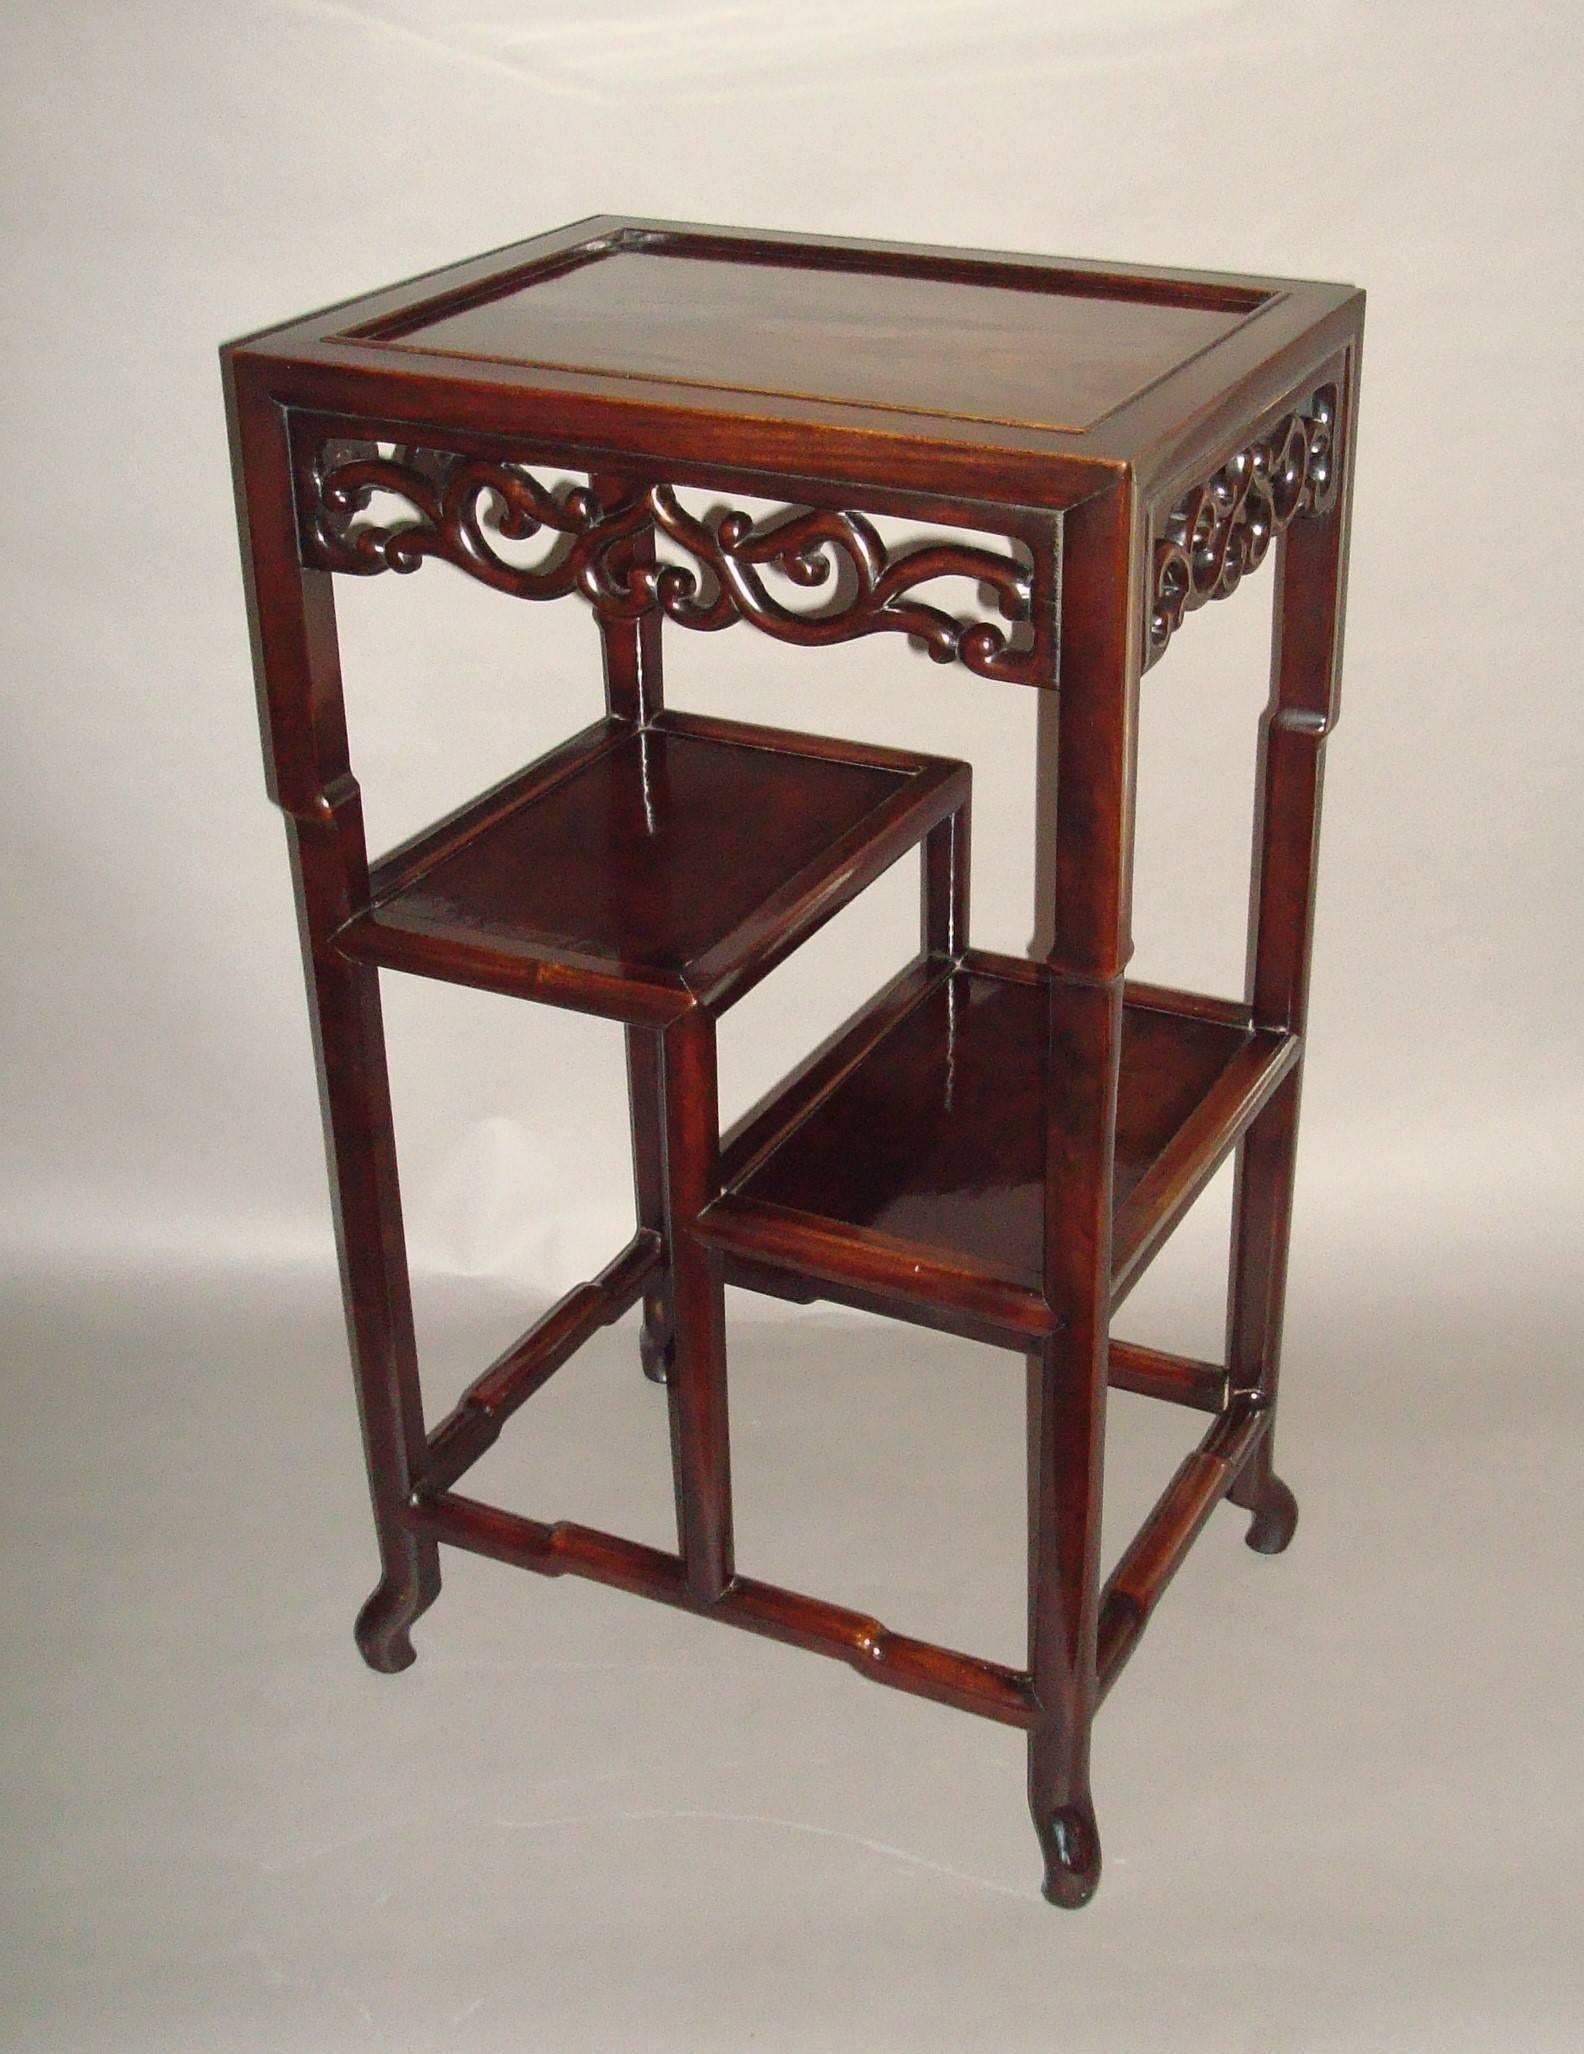 19th Century Chinese Hongmu Stand In Excellent Condition For Sale In Moreton-in-Marsh, Gloucestershire